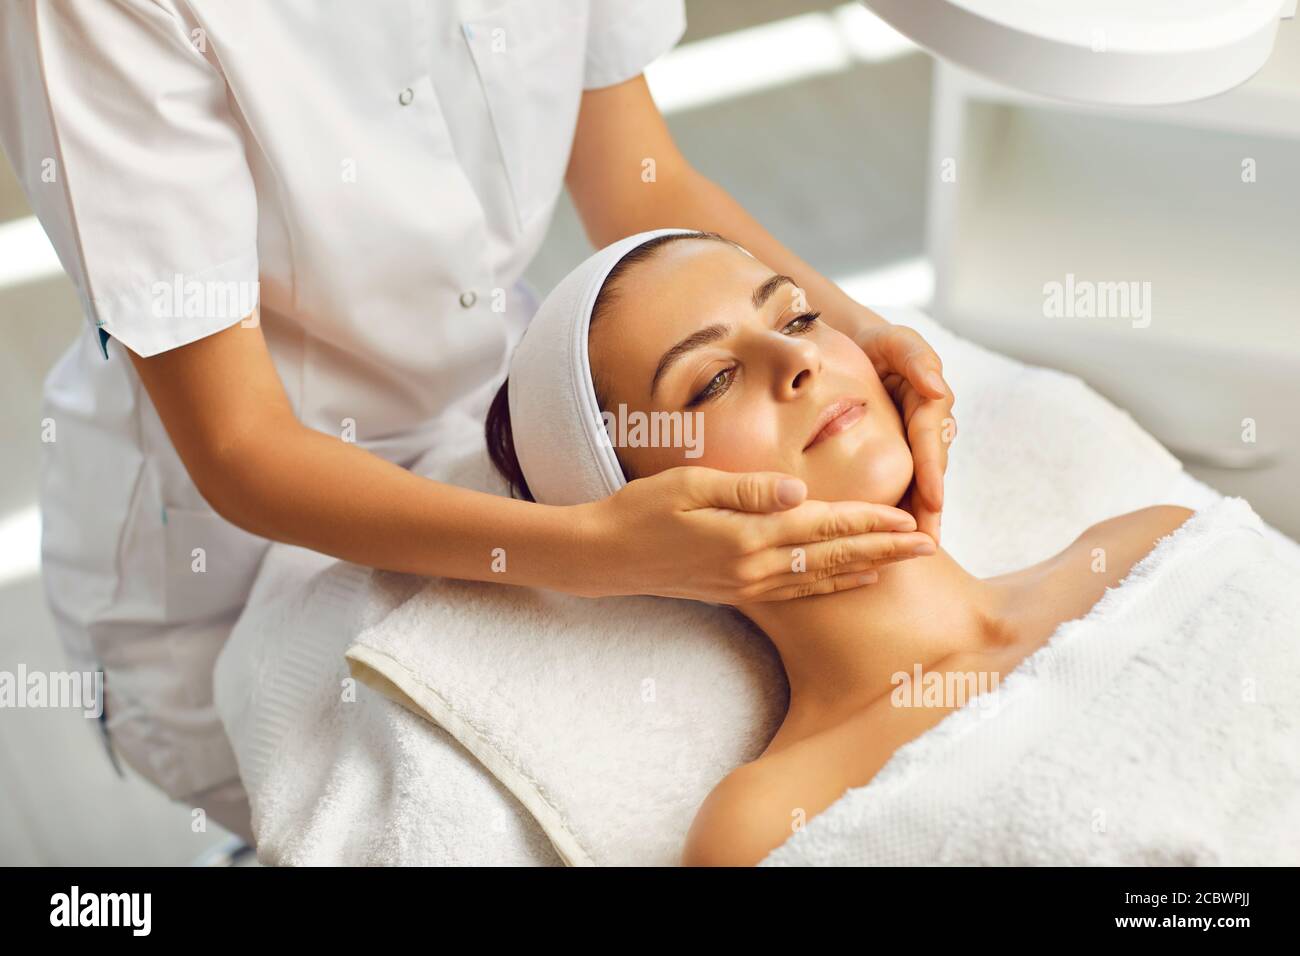 Hands of cosmetologist massaging relaxed womans face in spa beauty salon Stock Photo